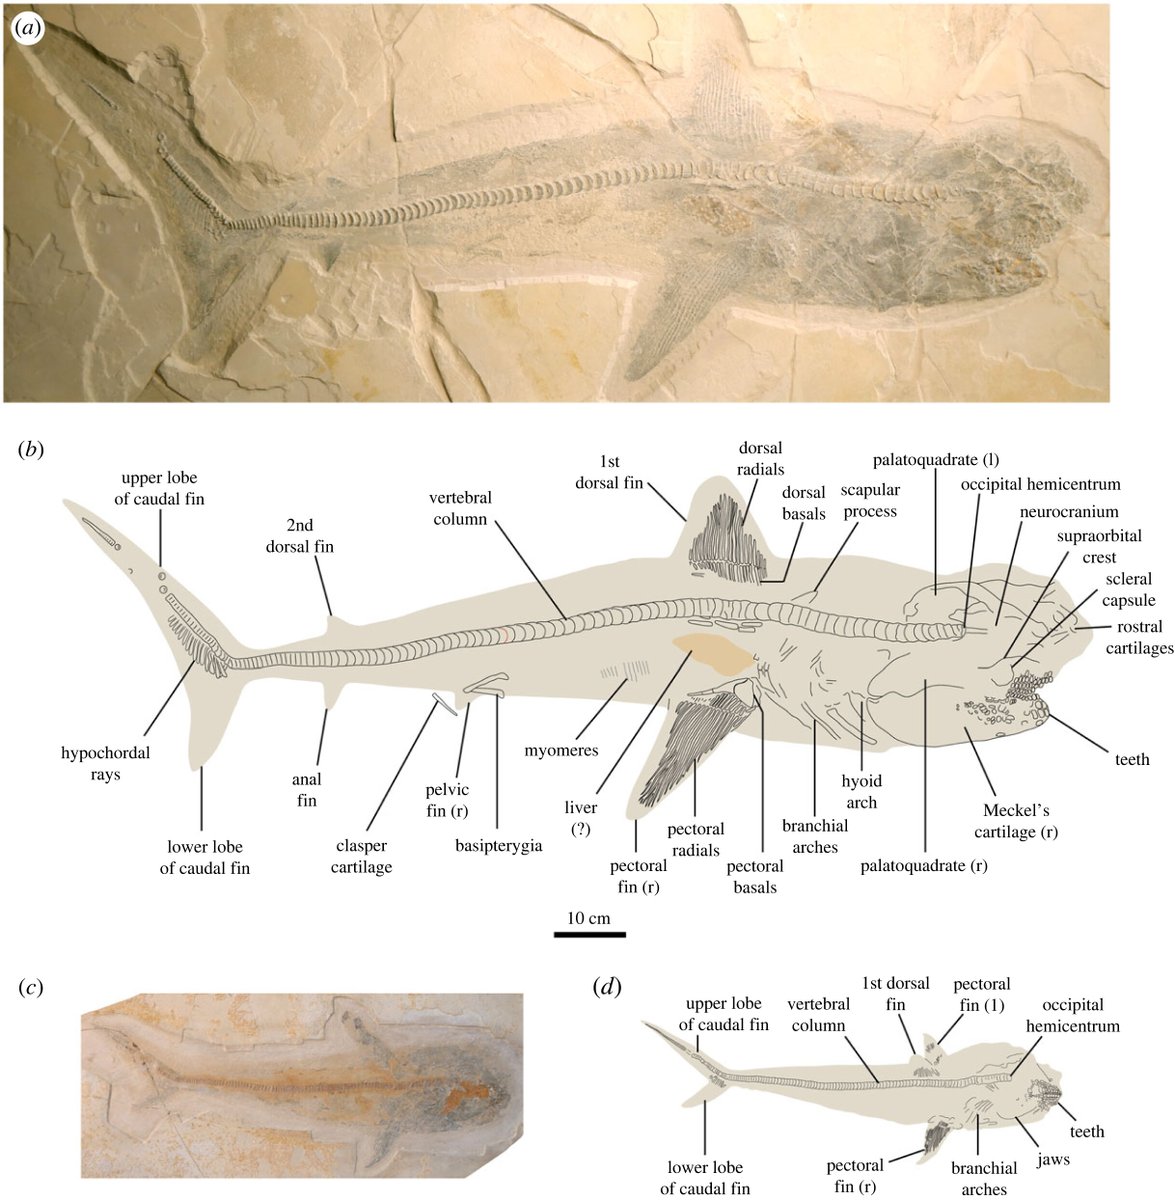 Exceptionally preserved #shark fossils from Mexico elucidate the long-standing enigma of the #Cretaceous elasmobranch Ptychodus #ProcB ow.ly/CPlT50RqB2Q #Palaeobiology